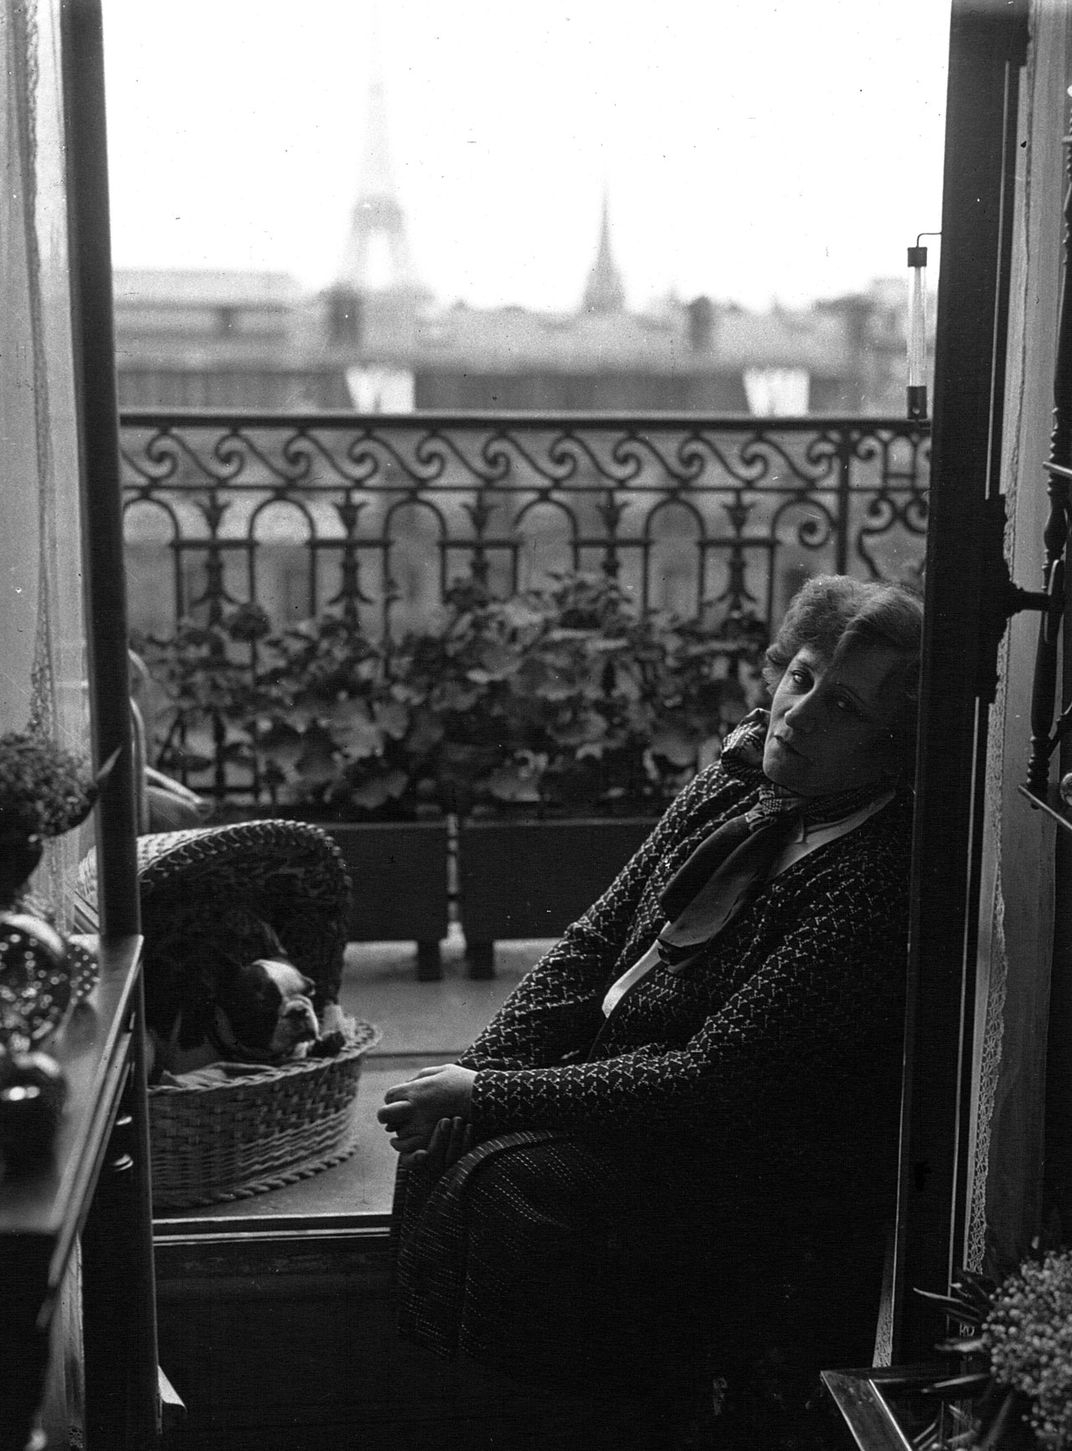 Colette seated on her balcony, with the Eiffel Tower visible in the background, in 1932